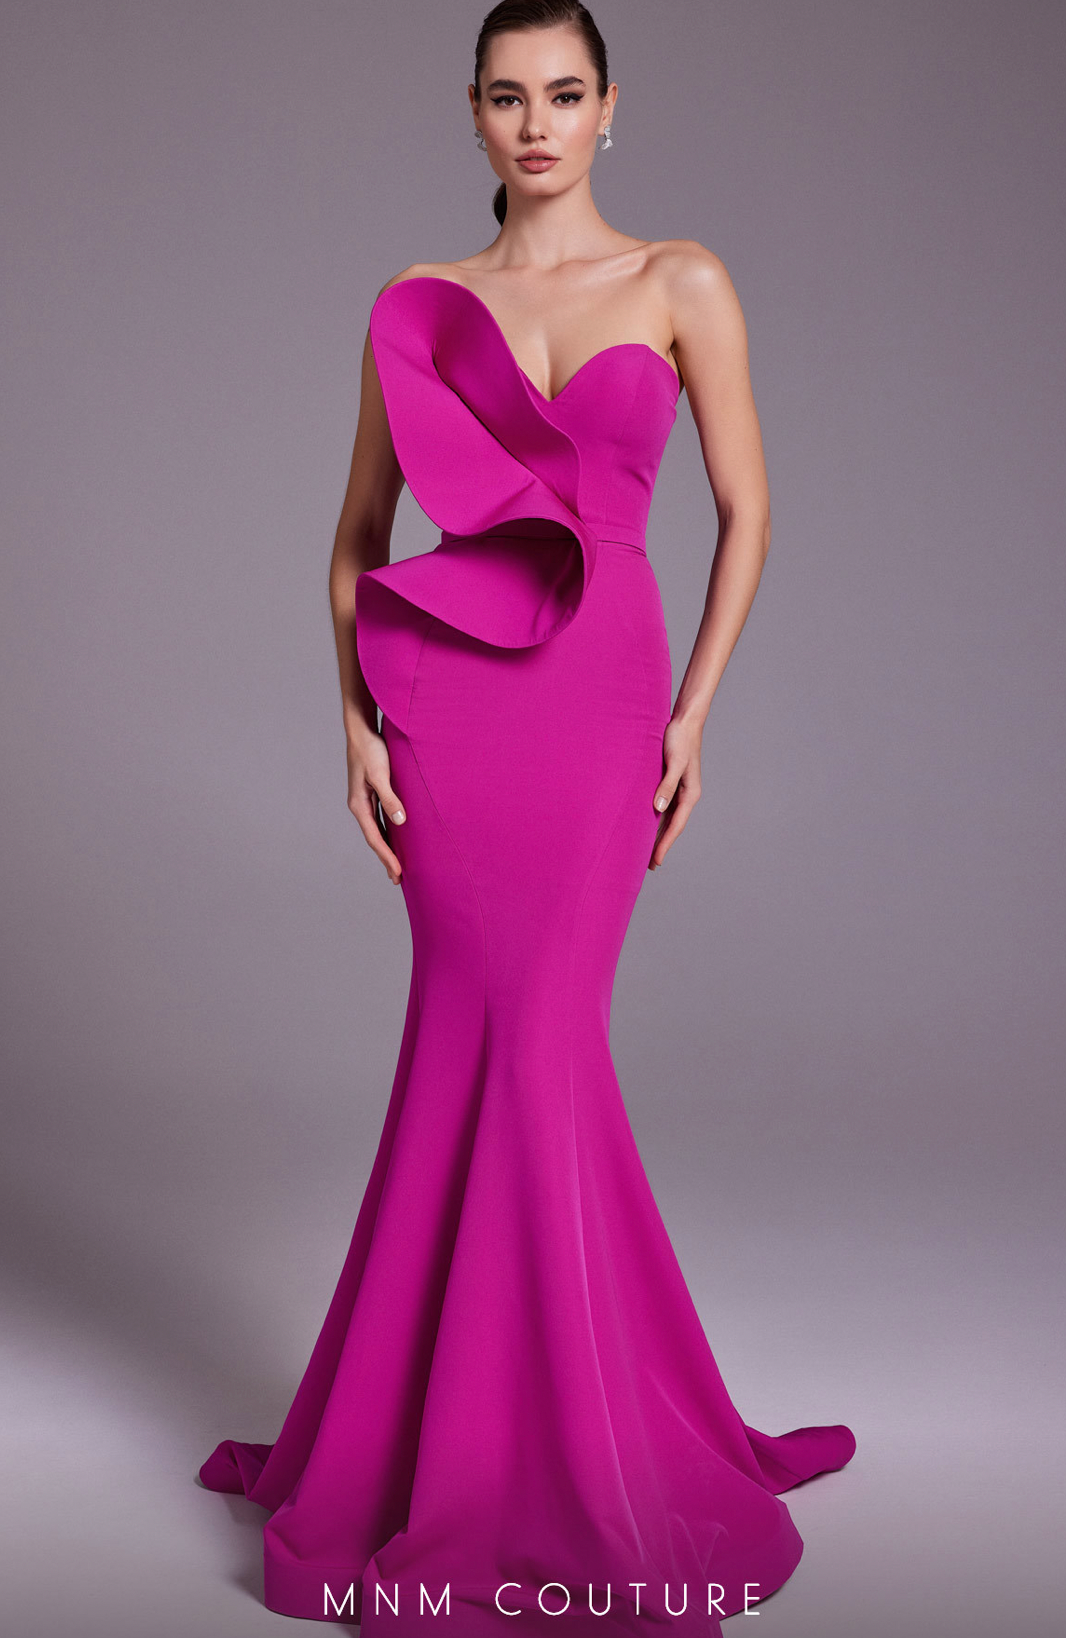 MNM Couture N0548 Dress